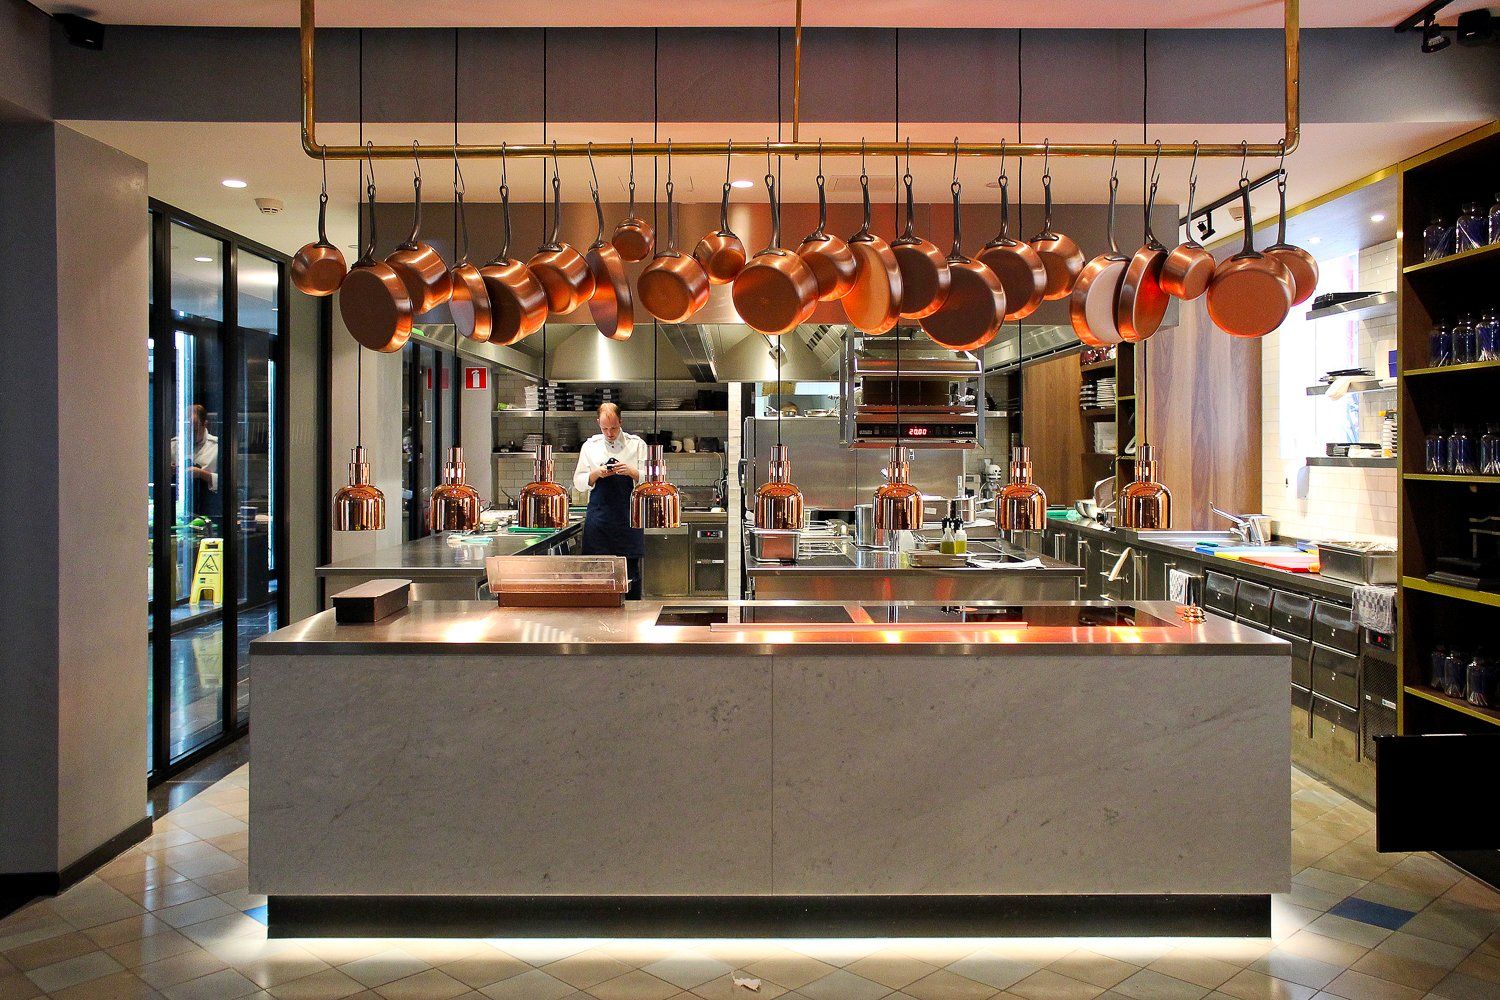 Concrete and copper open kitchen at the Pressroom Restaurant.